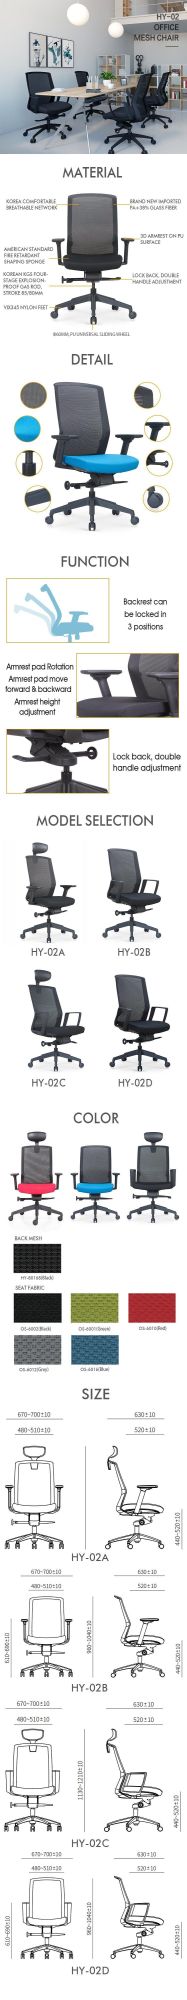 University School Classroom Mesh Chairs with Wheels and Tablet